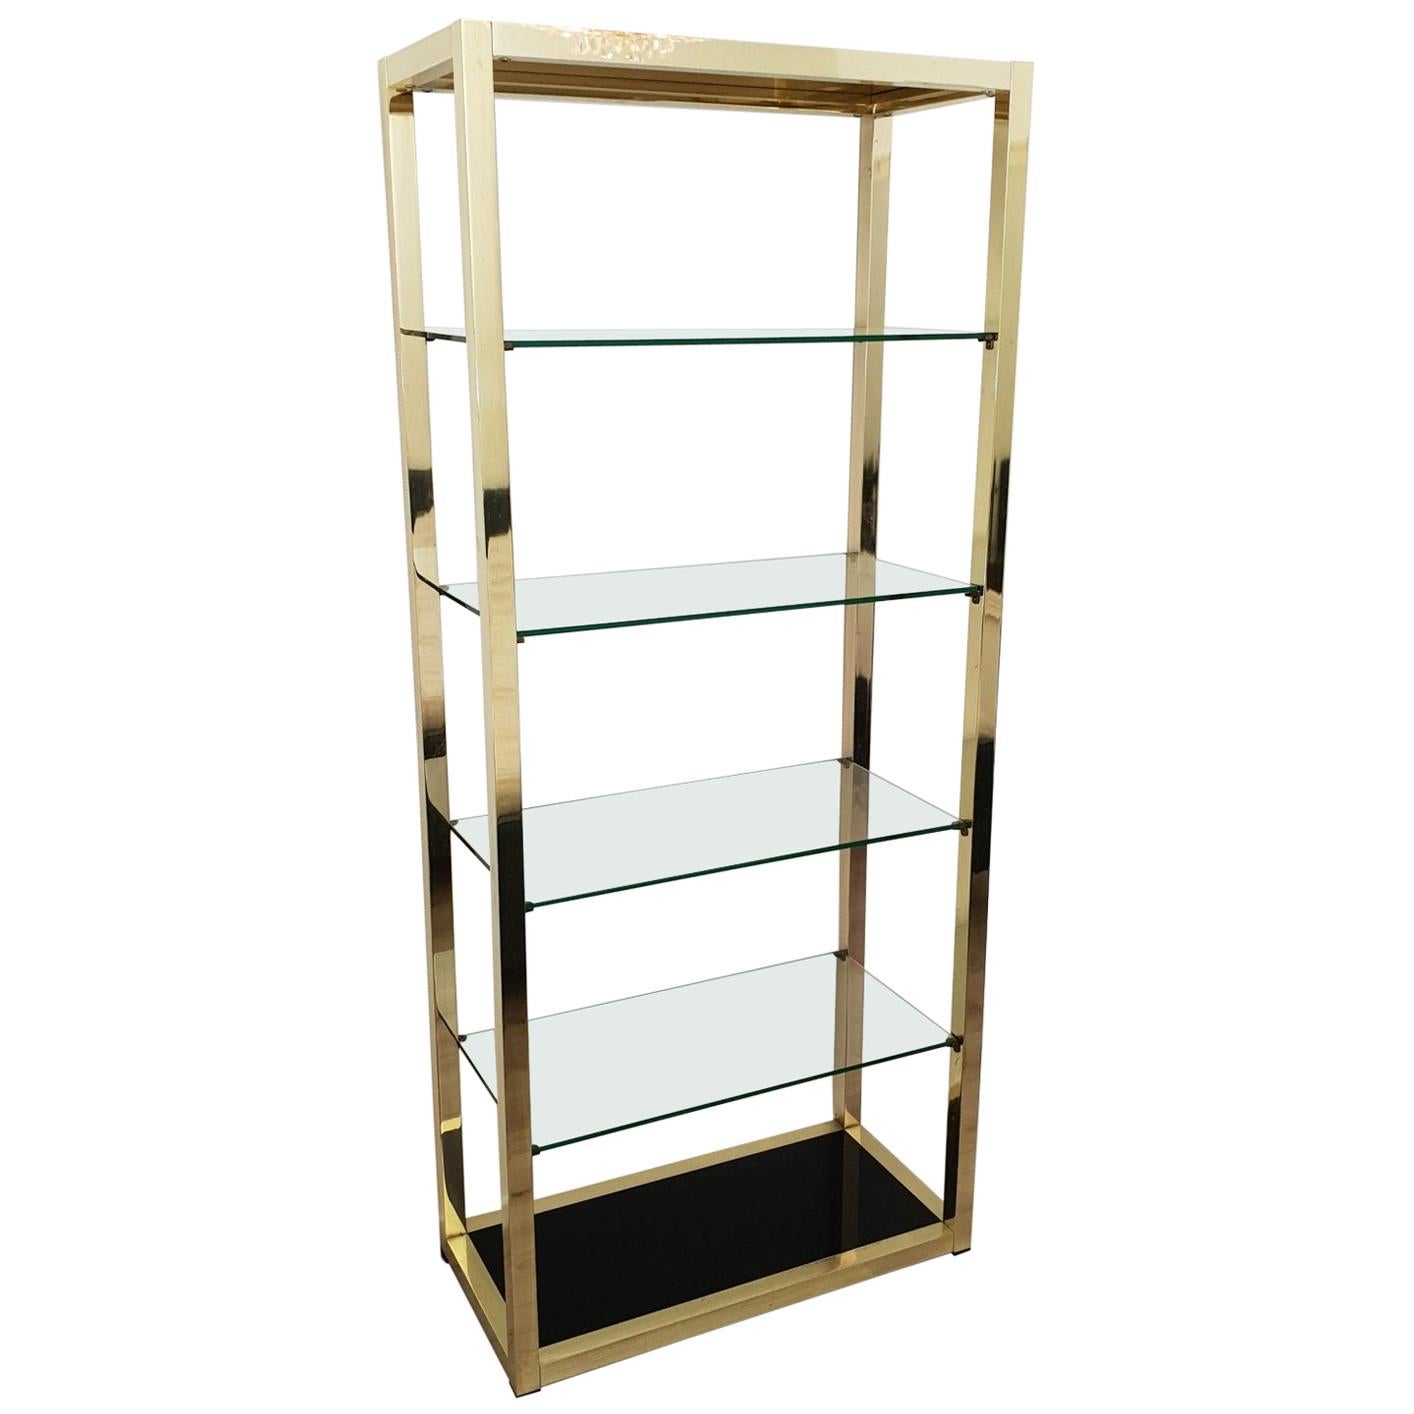 Italian Mid-Century Modern Gold Plated Shelving Unit Étagère, 1970s For Sale